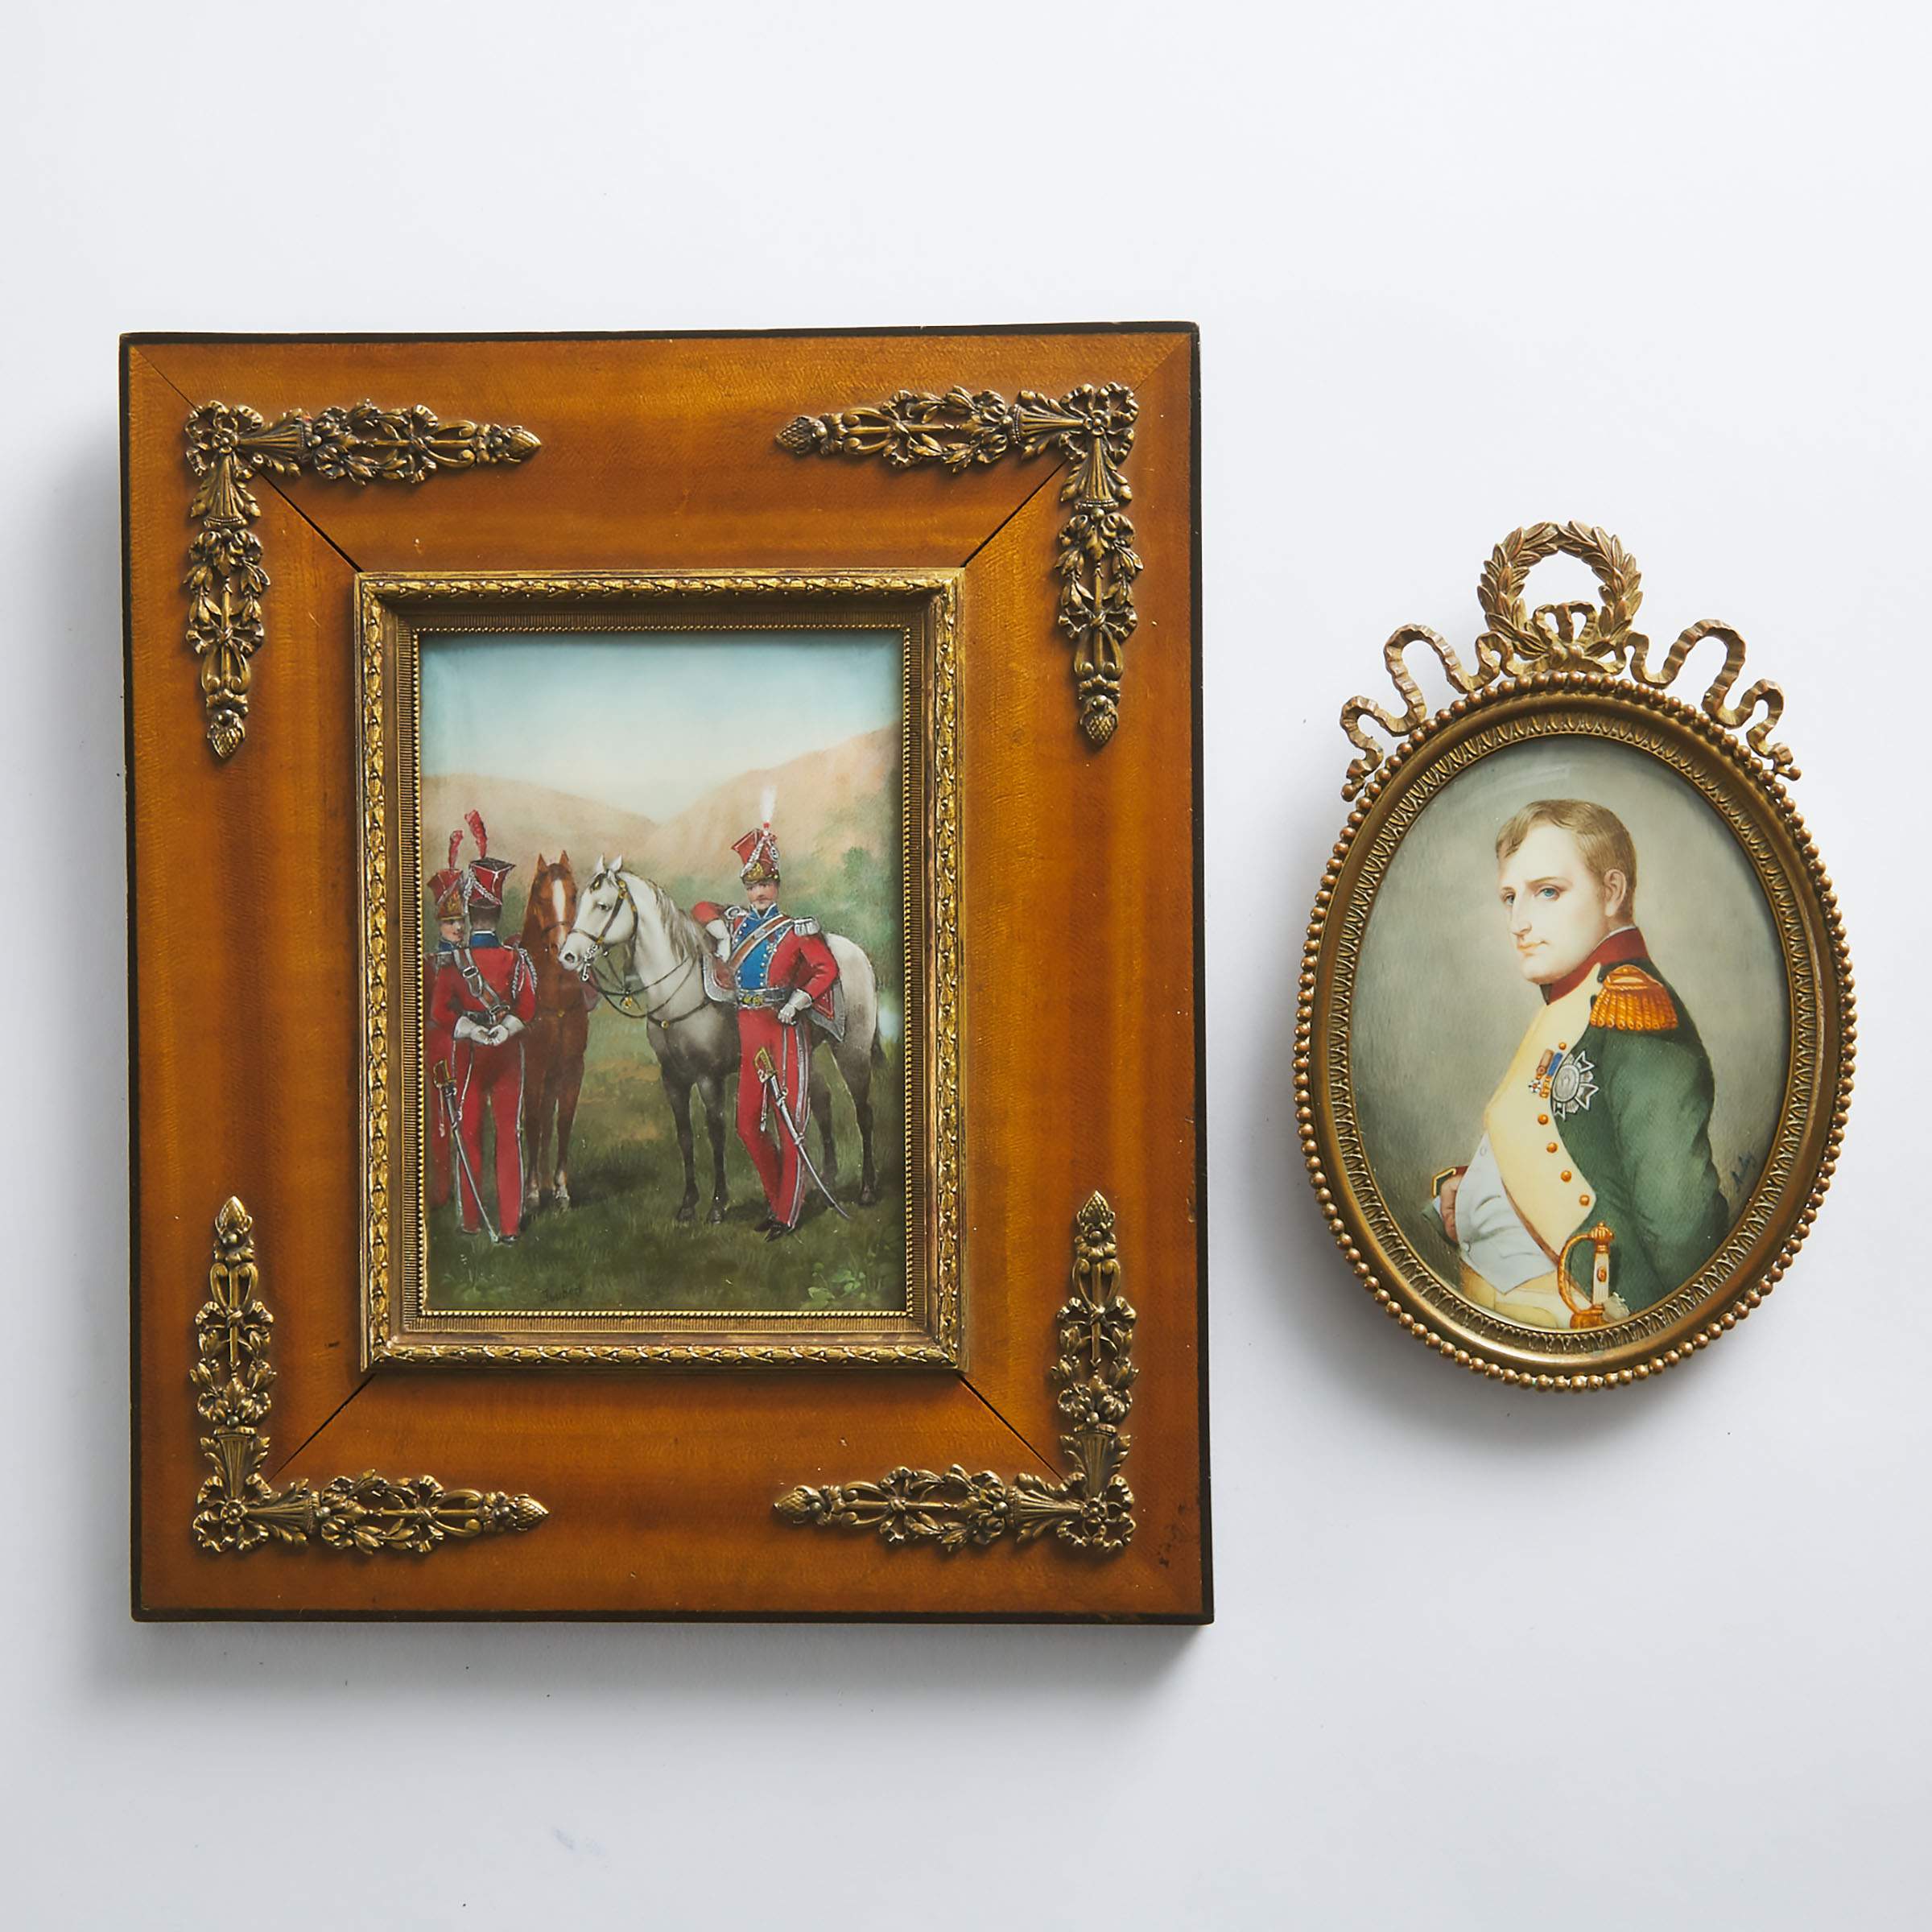 Two Napoleonic MIniature Pictures, 19th/early 20th century